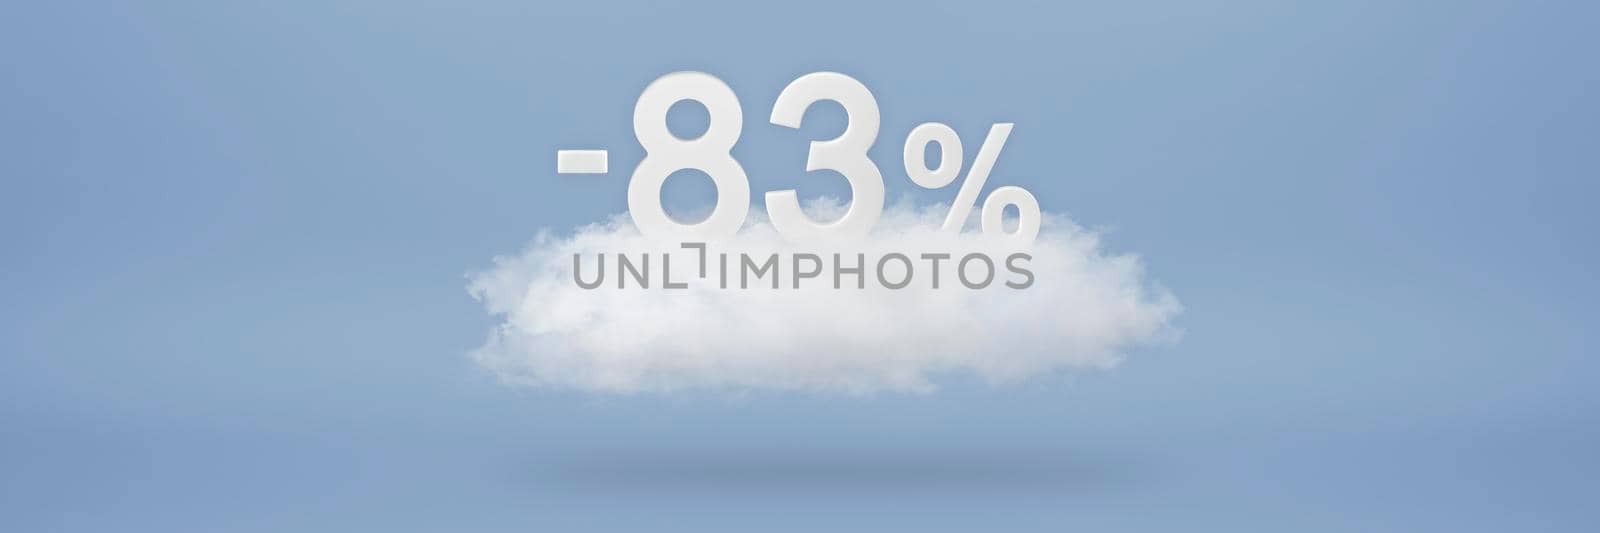 Discount 83 percent. Big discounts, sale up to eighty three percent. 3D numbers float on a cloud on a blue background. Copy space. Advertising banner and poster to be inserted into the project by SERSOL